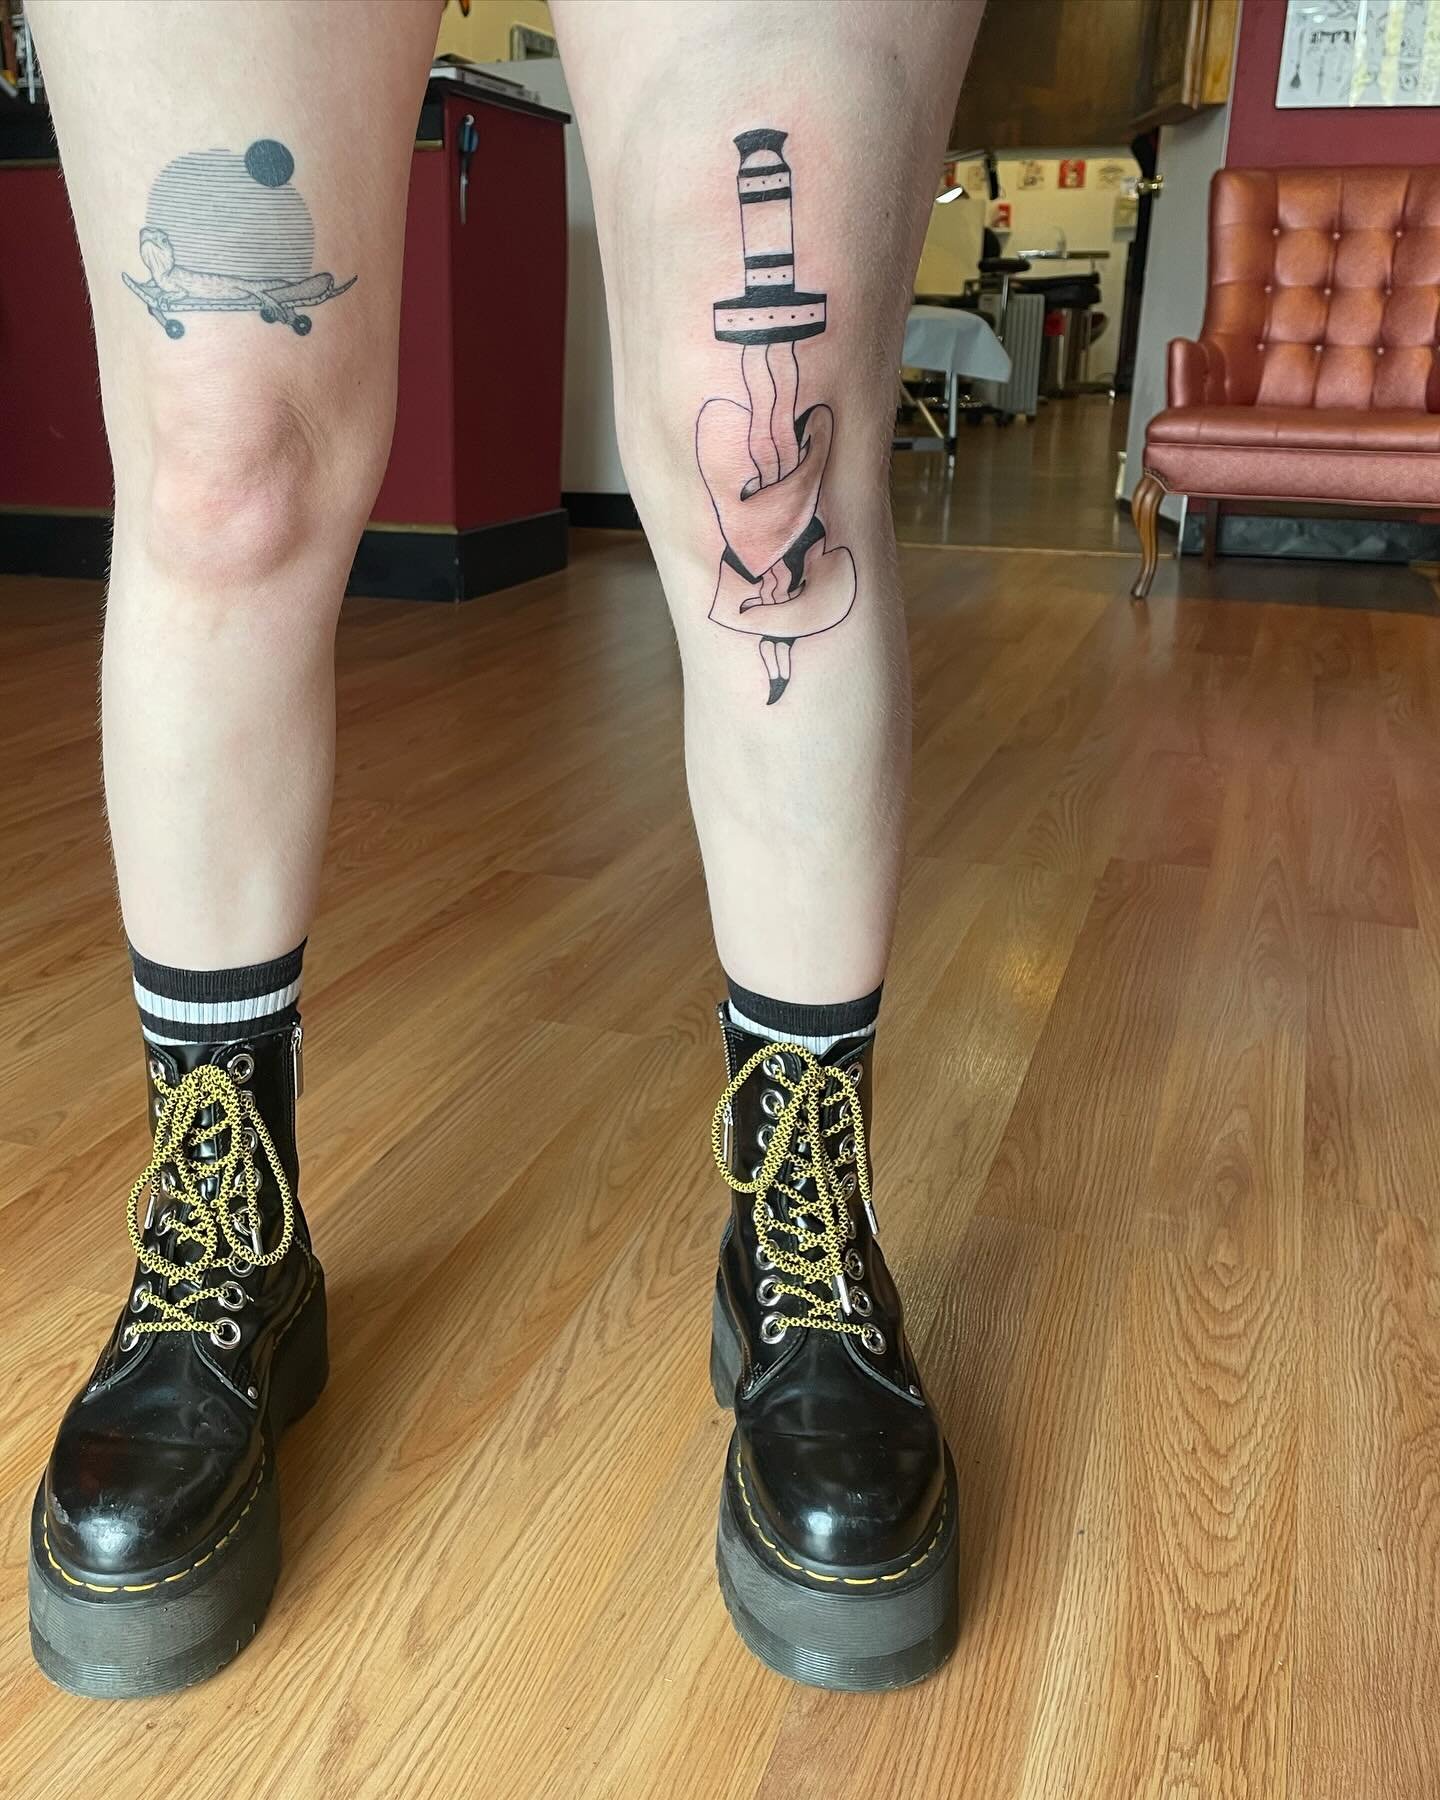 Was given the opportunity to tattoo a knee! Thanks for sitting well and being so awesome! Getting to develop relationships through tattooing is an incredible experience.

Booking for a few spots in April- 4/17, 4/24, 4/27 and May is open! Send a Dm t